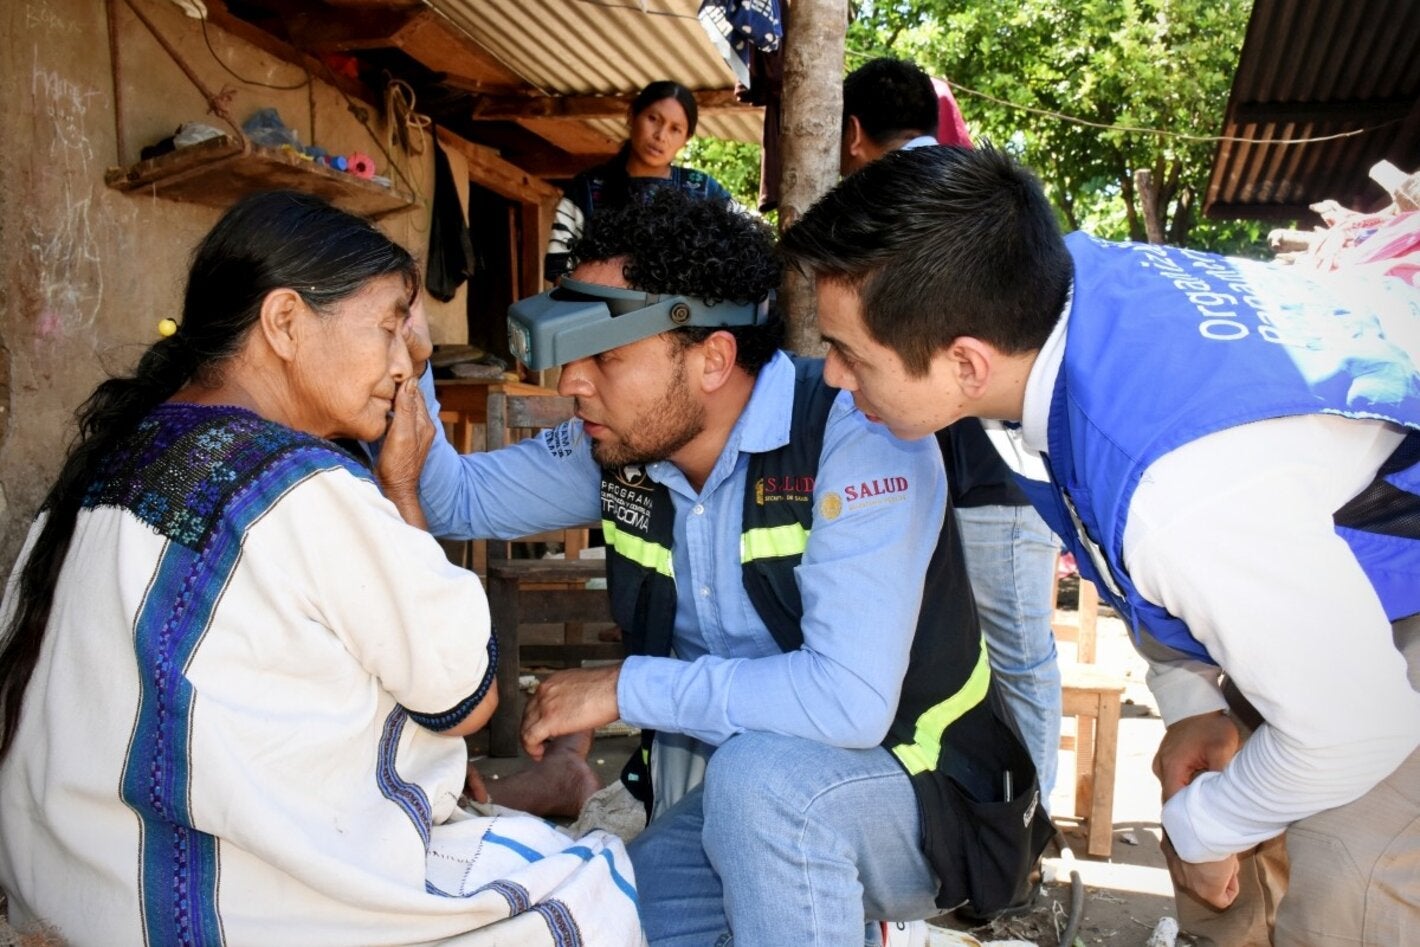 Mexico Keeps Working to Maintain Trachoma Elimination as a Public Health Problem